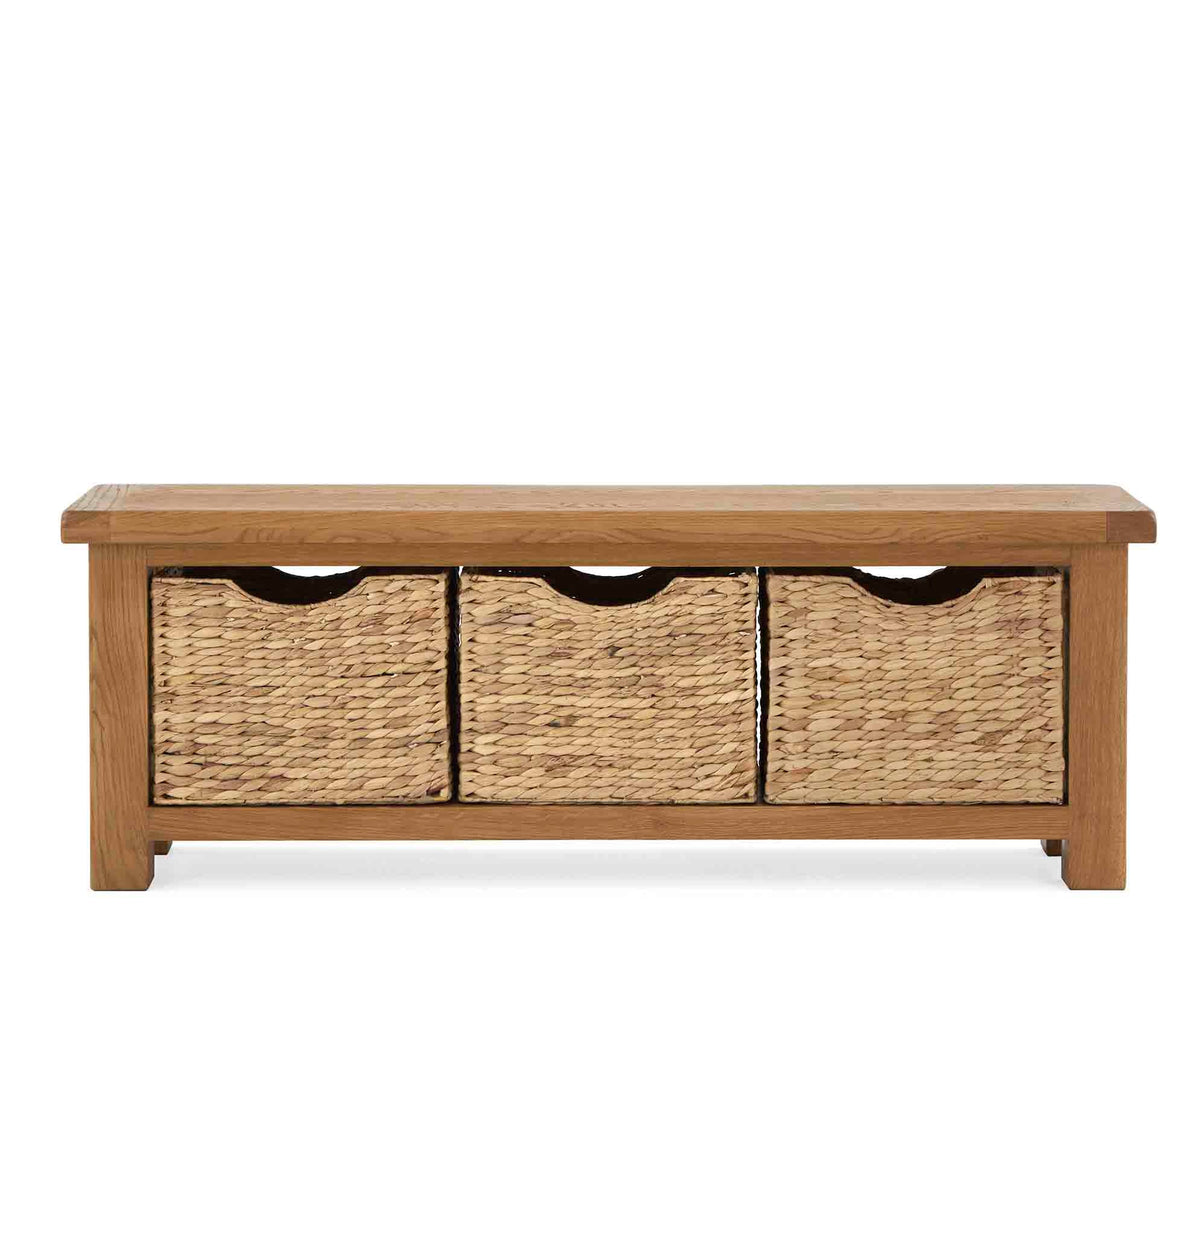 Zelah Oak Bench with Baskets - Front view